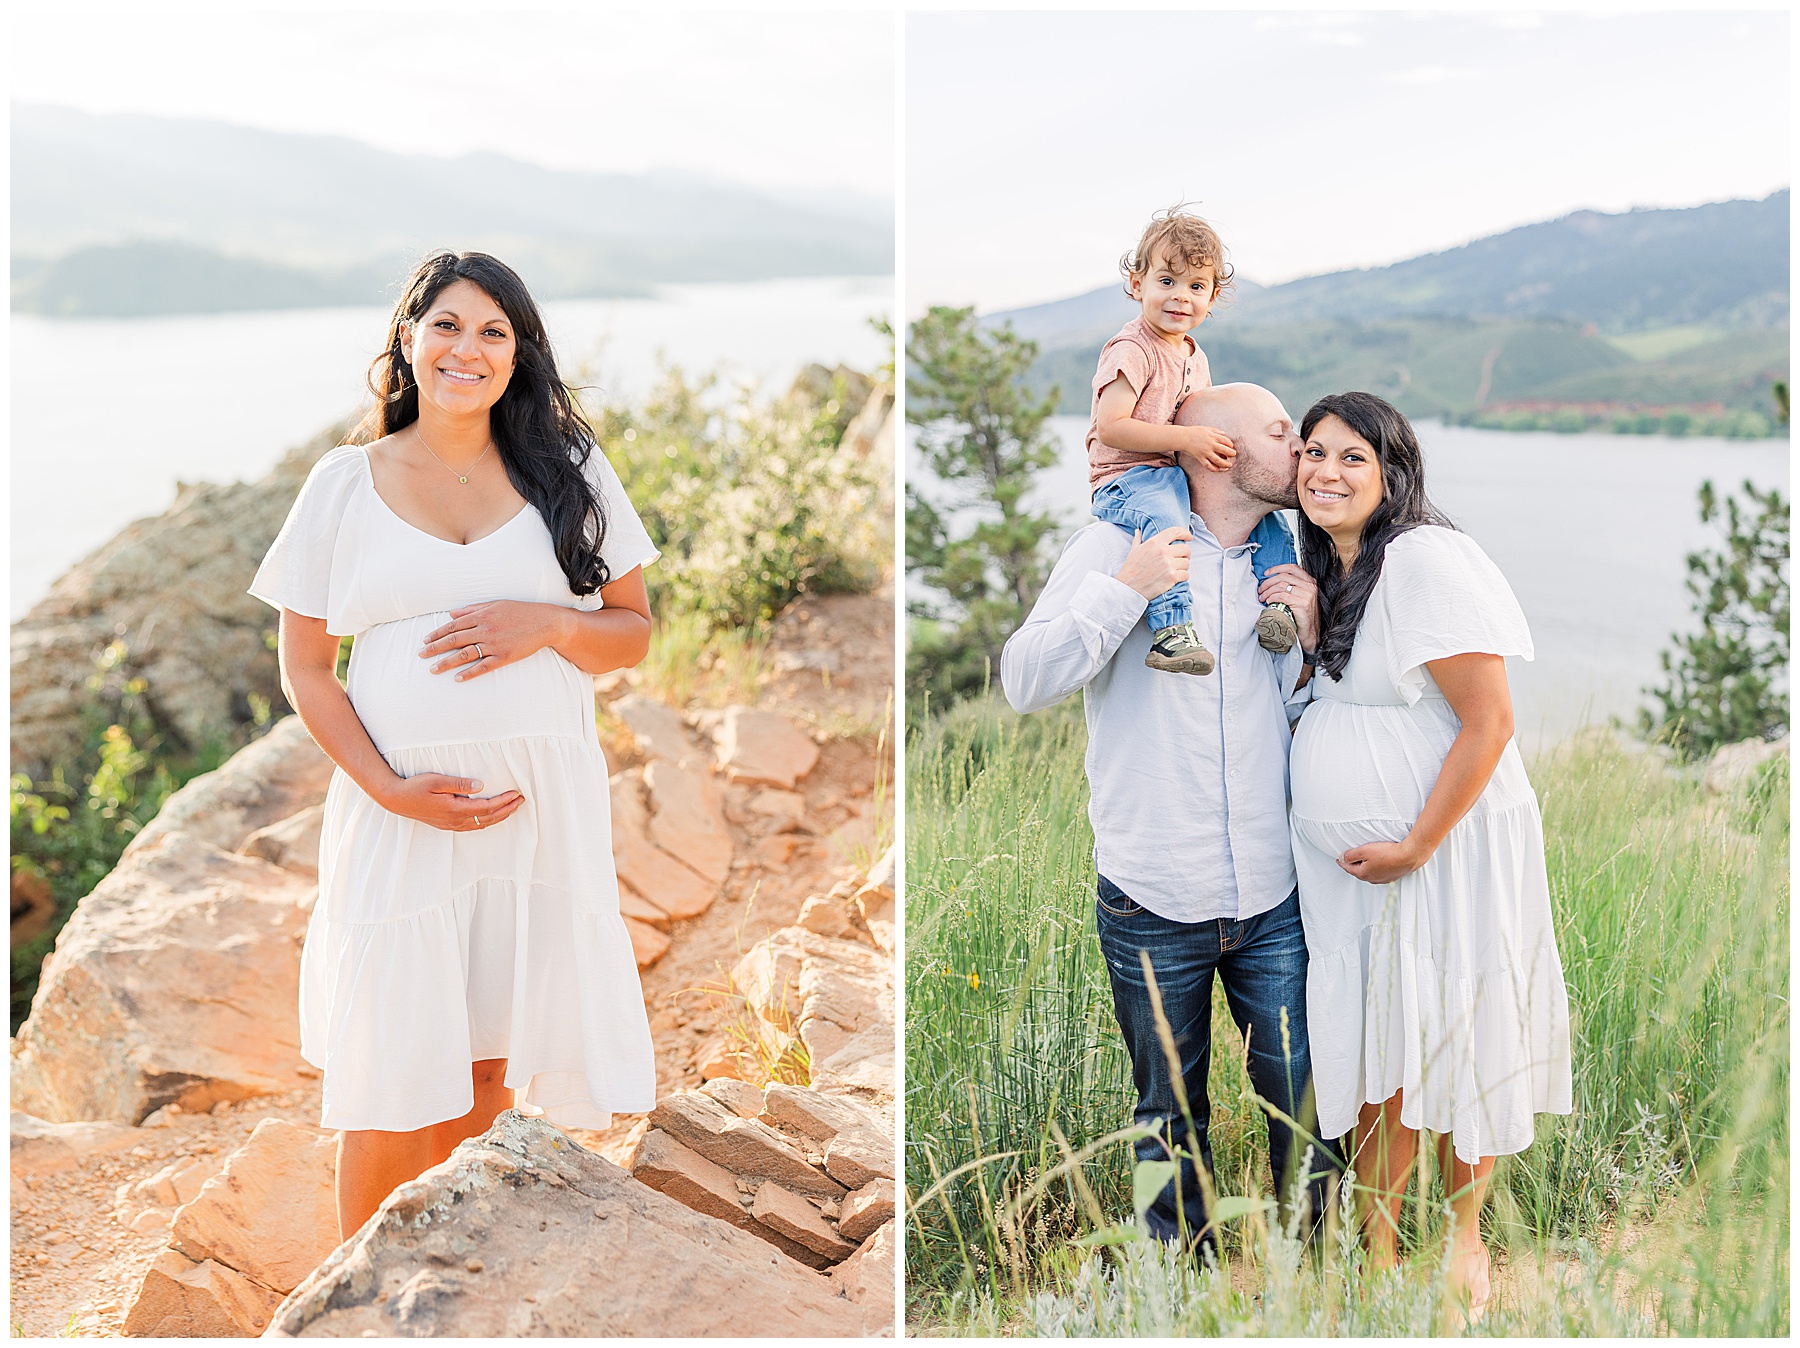 Expecting mother poses in a white dress for outdoor light and airy maternity photos